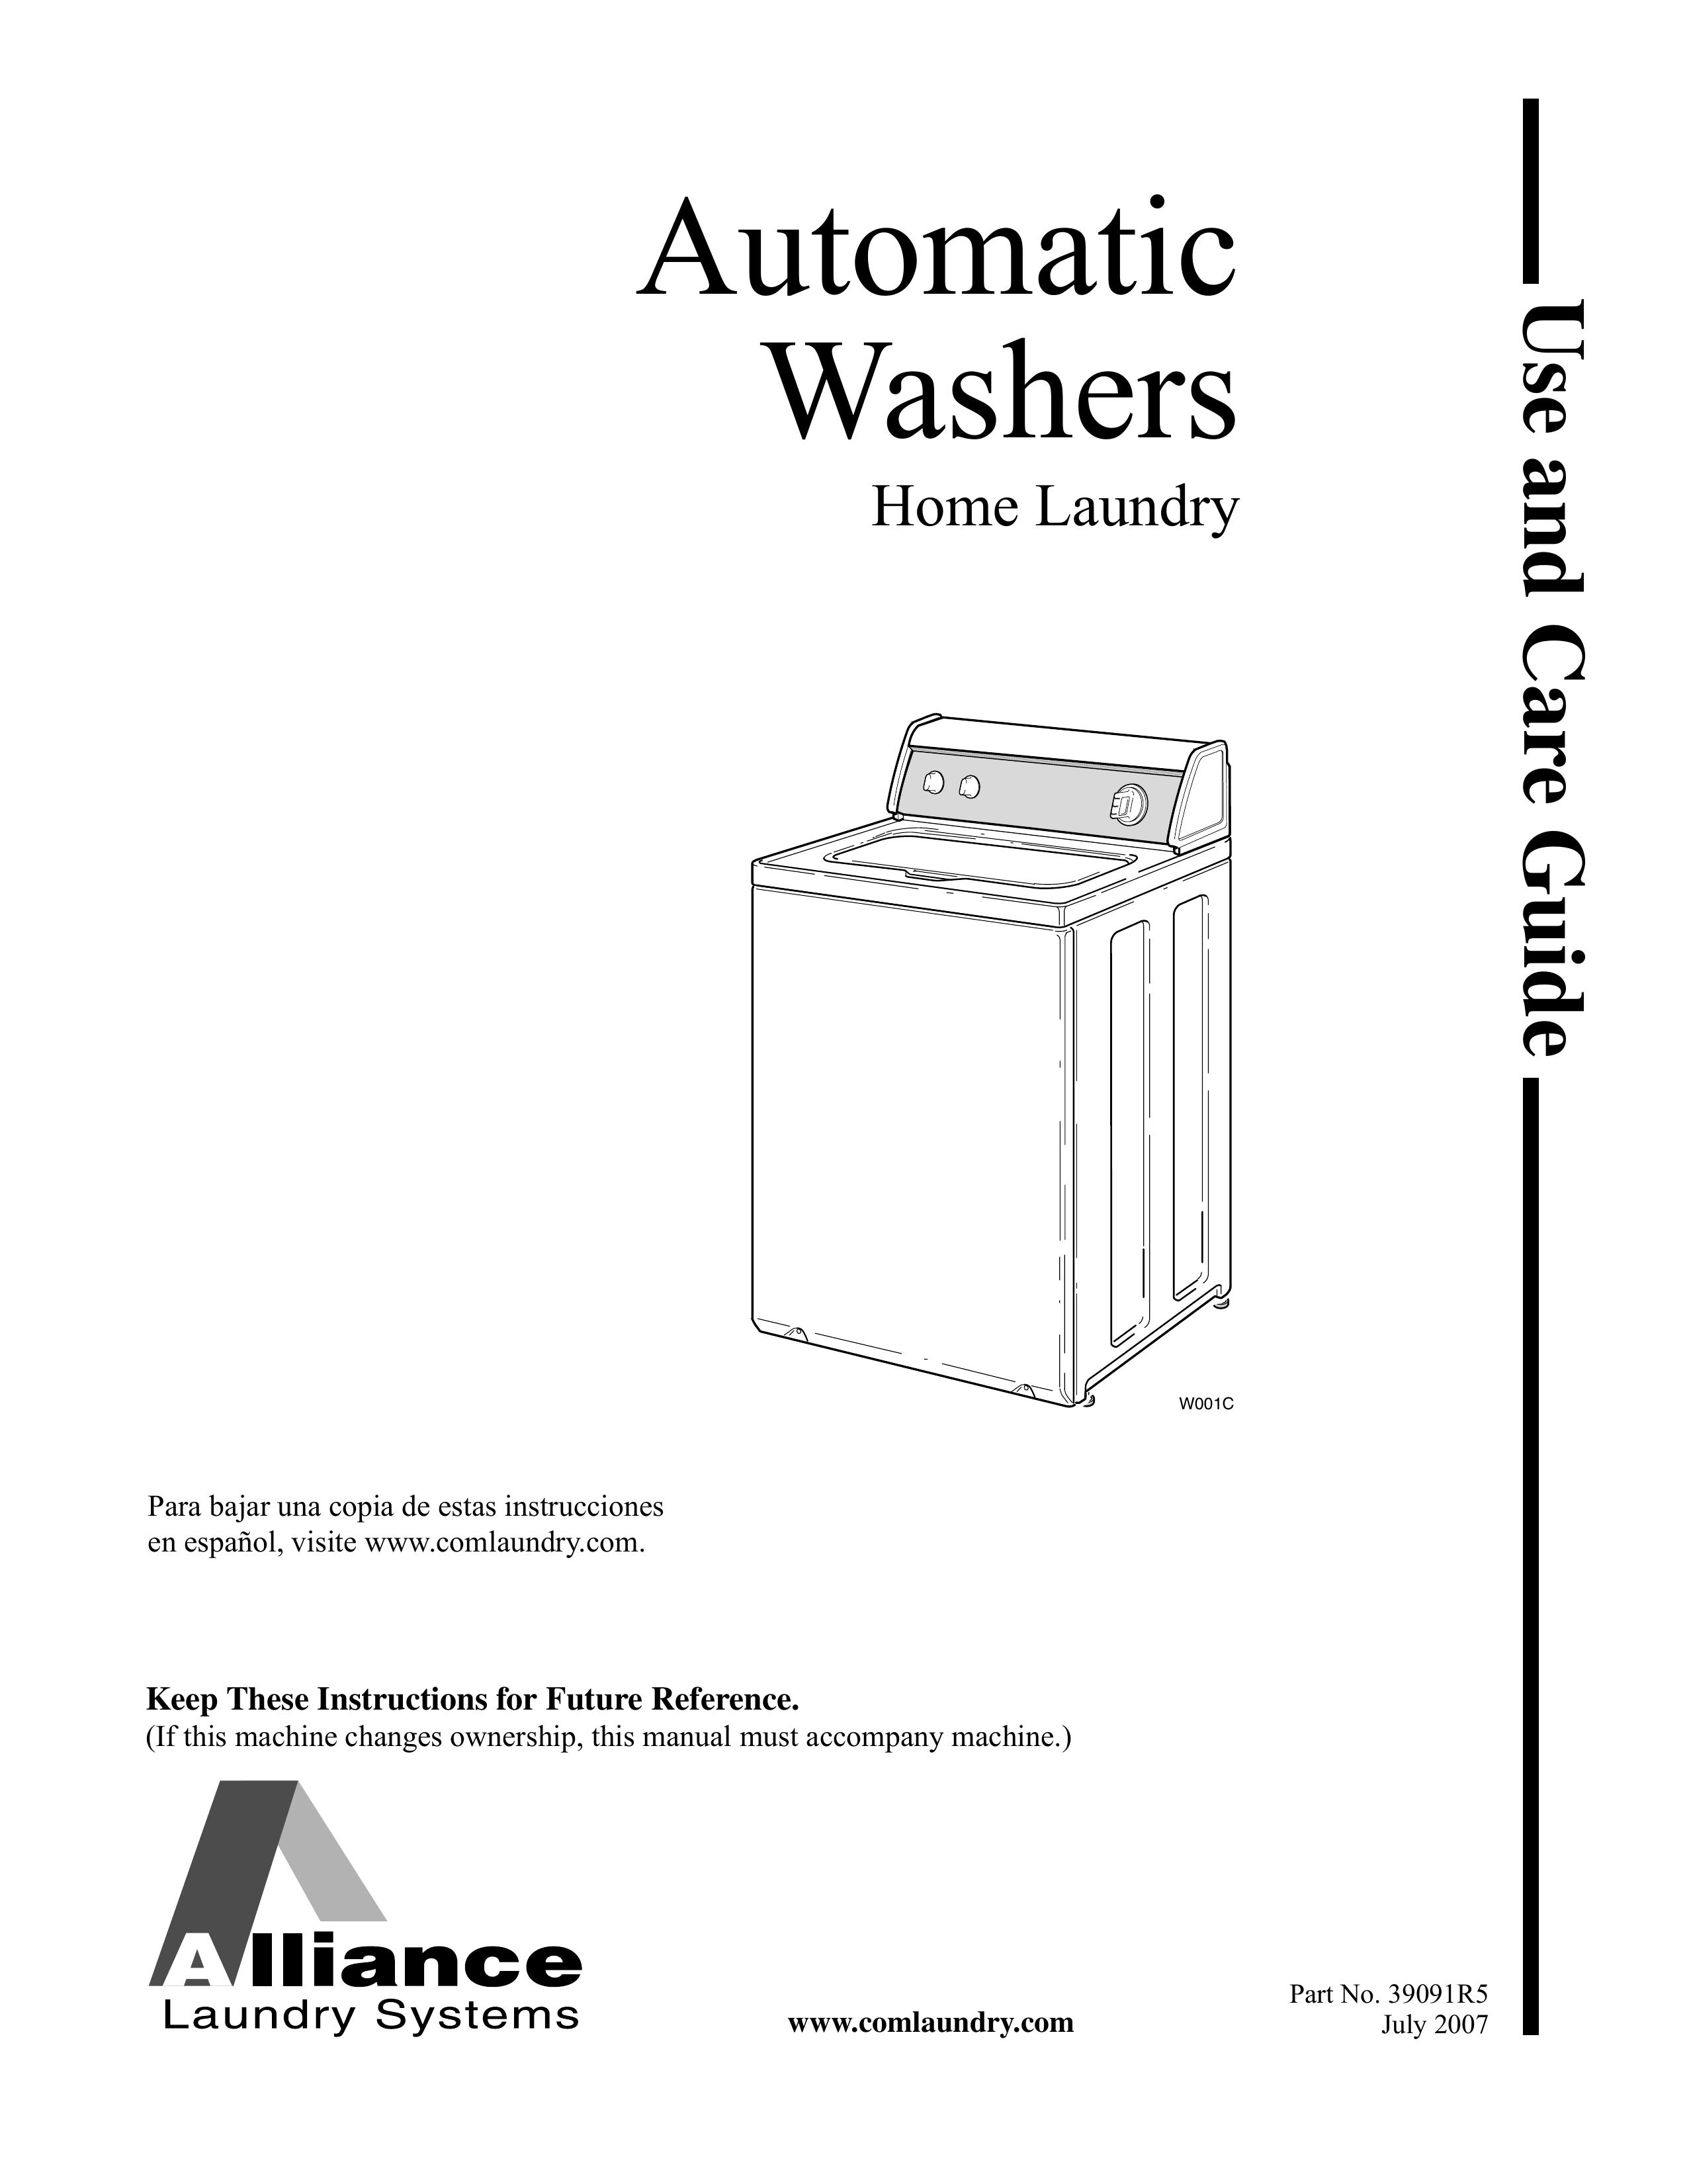 Alliance Laundry Systems LWS01A*C Washer/Dryer User Manual